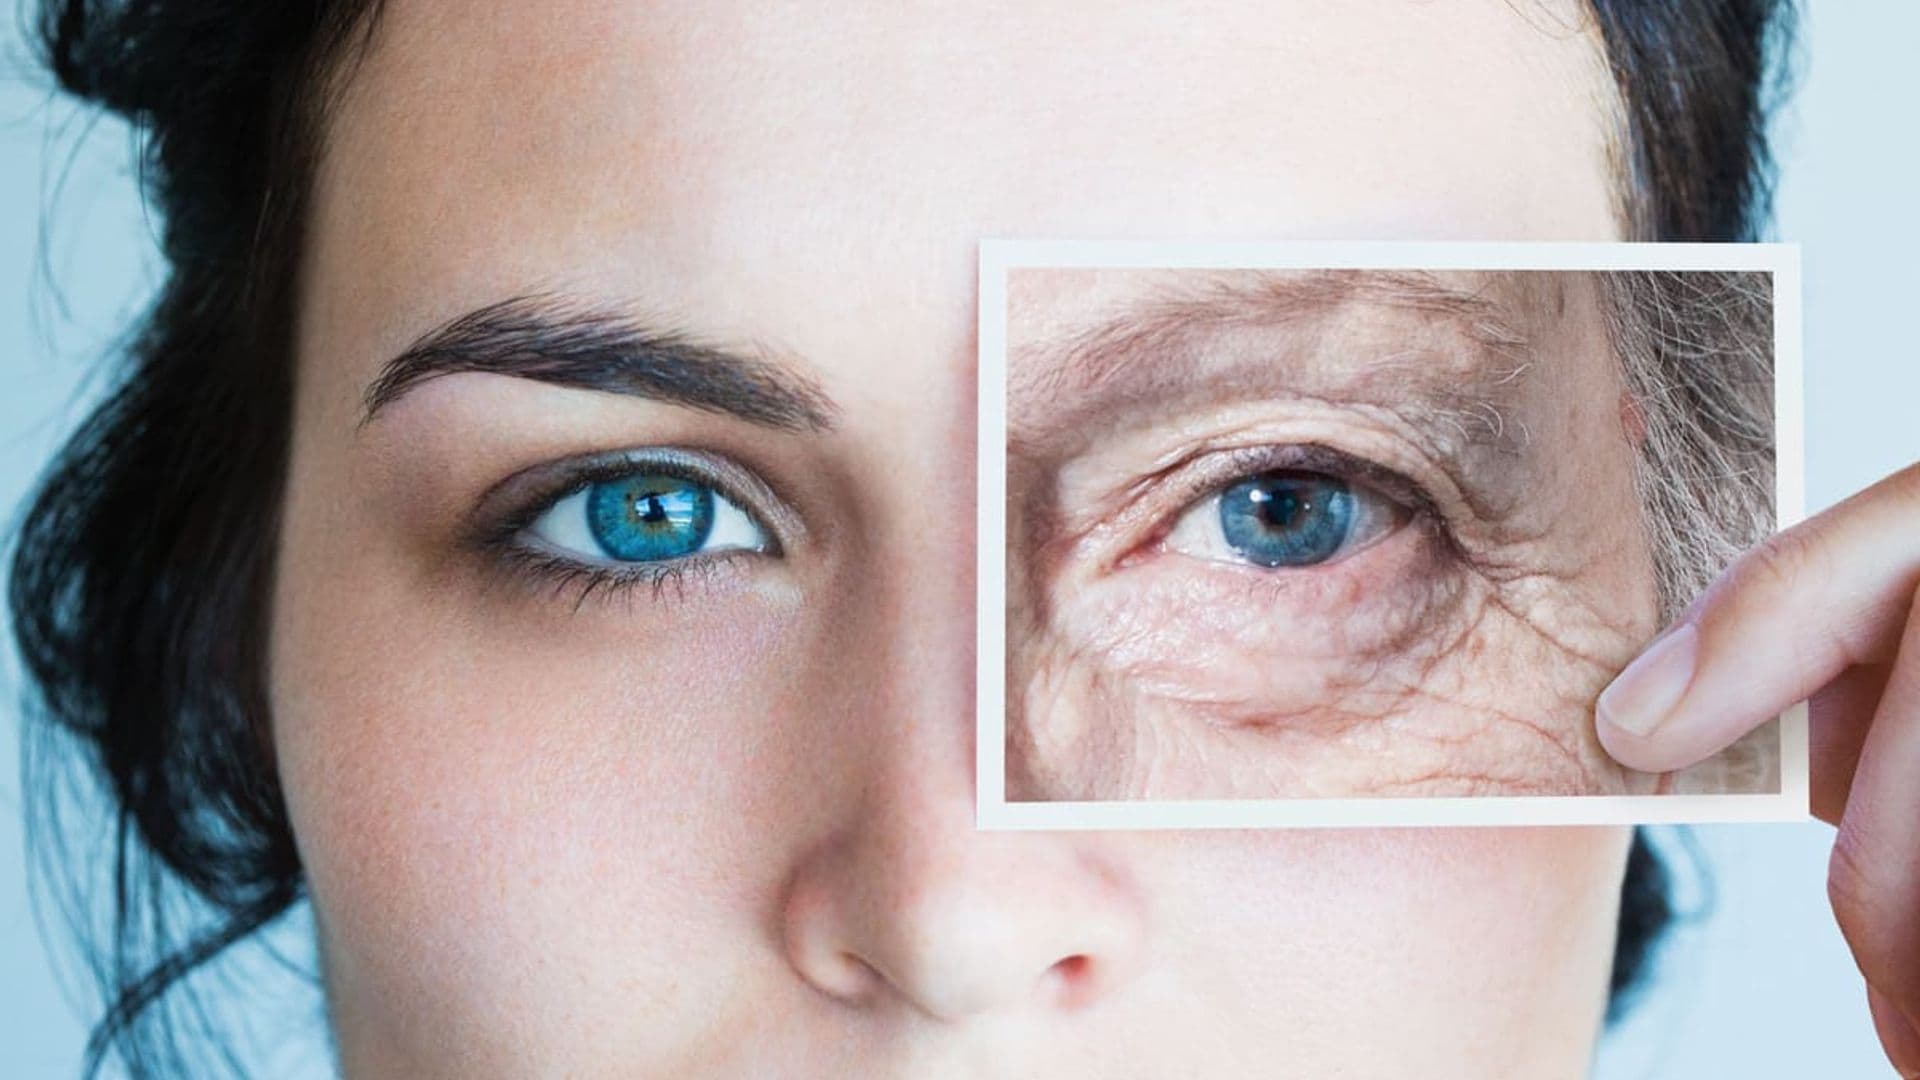 The science of aging: Menopause and its impact on facial features